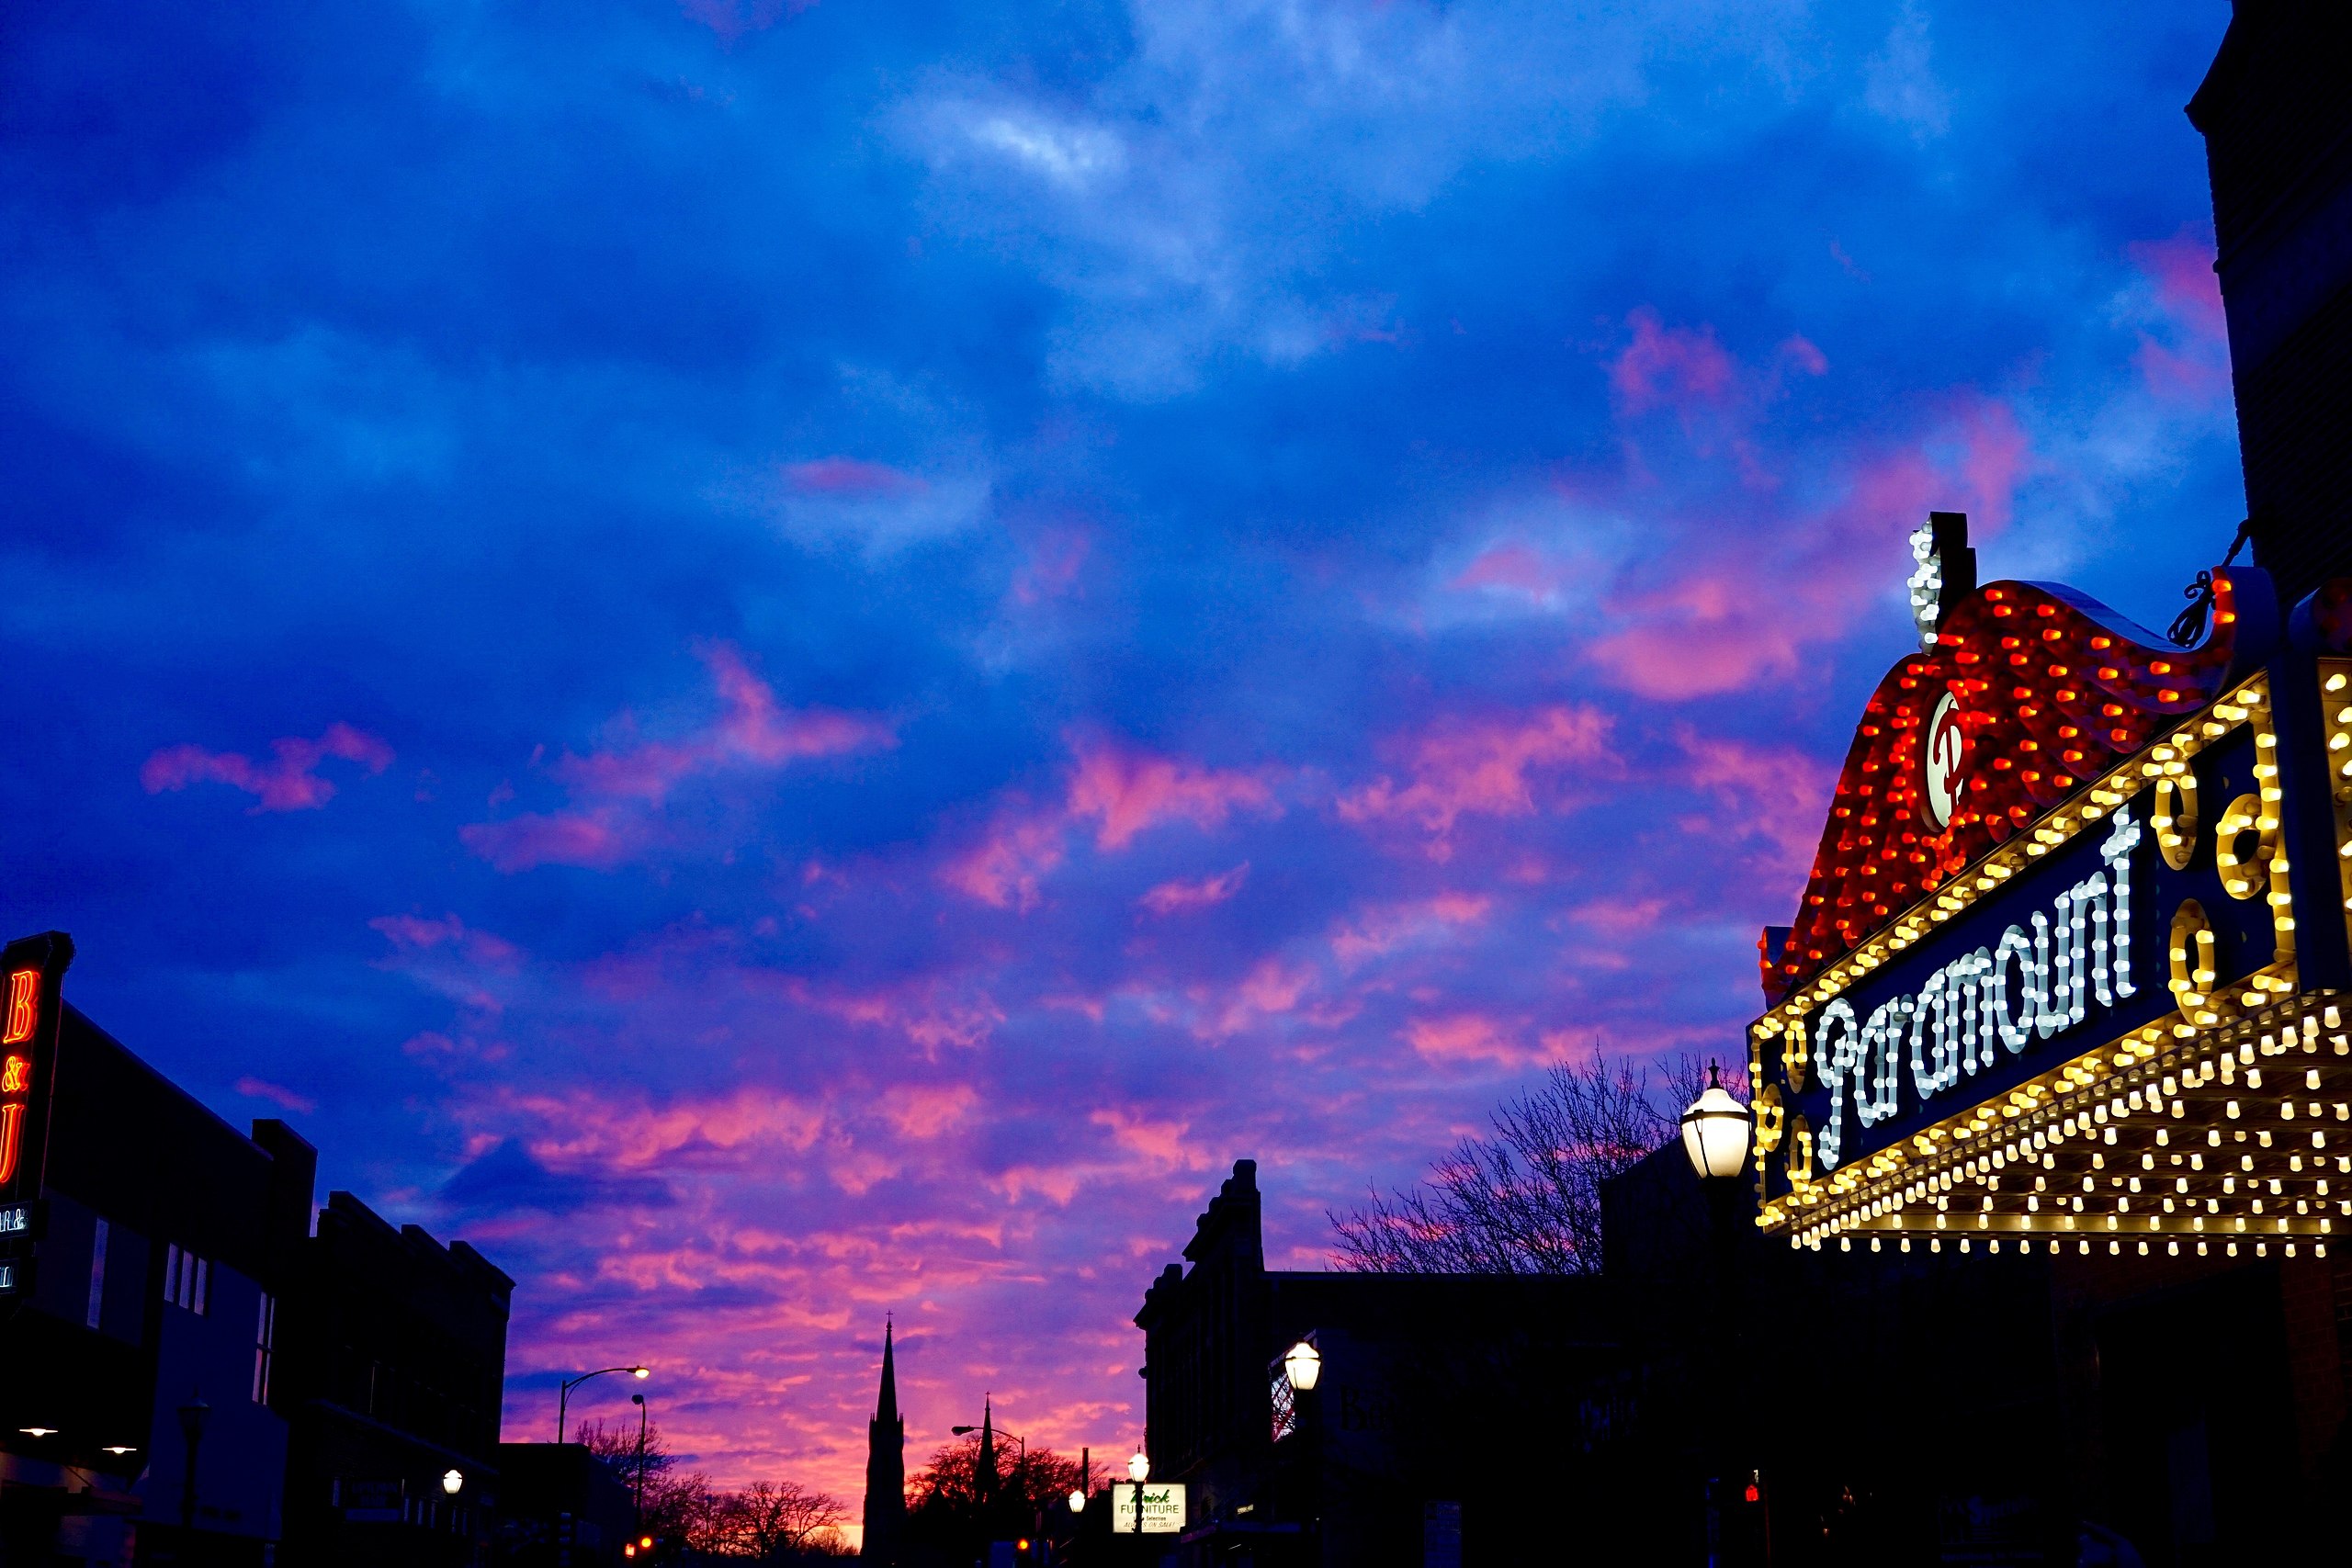 The entrance to the paramount theatre under a purple sunset